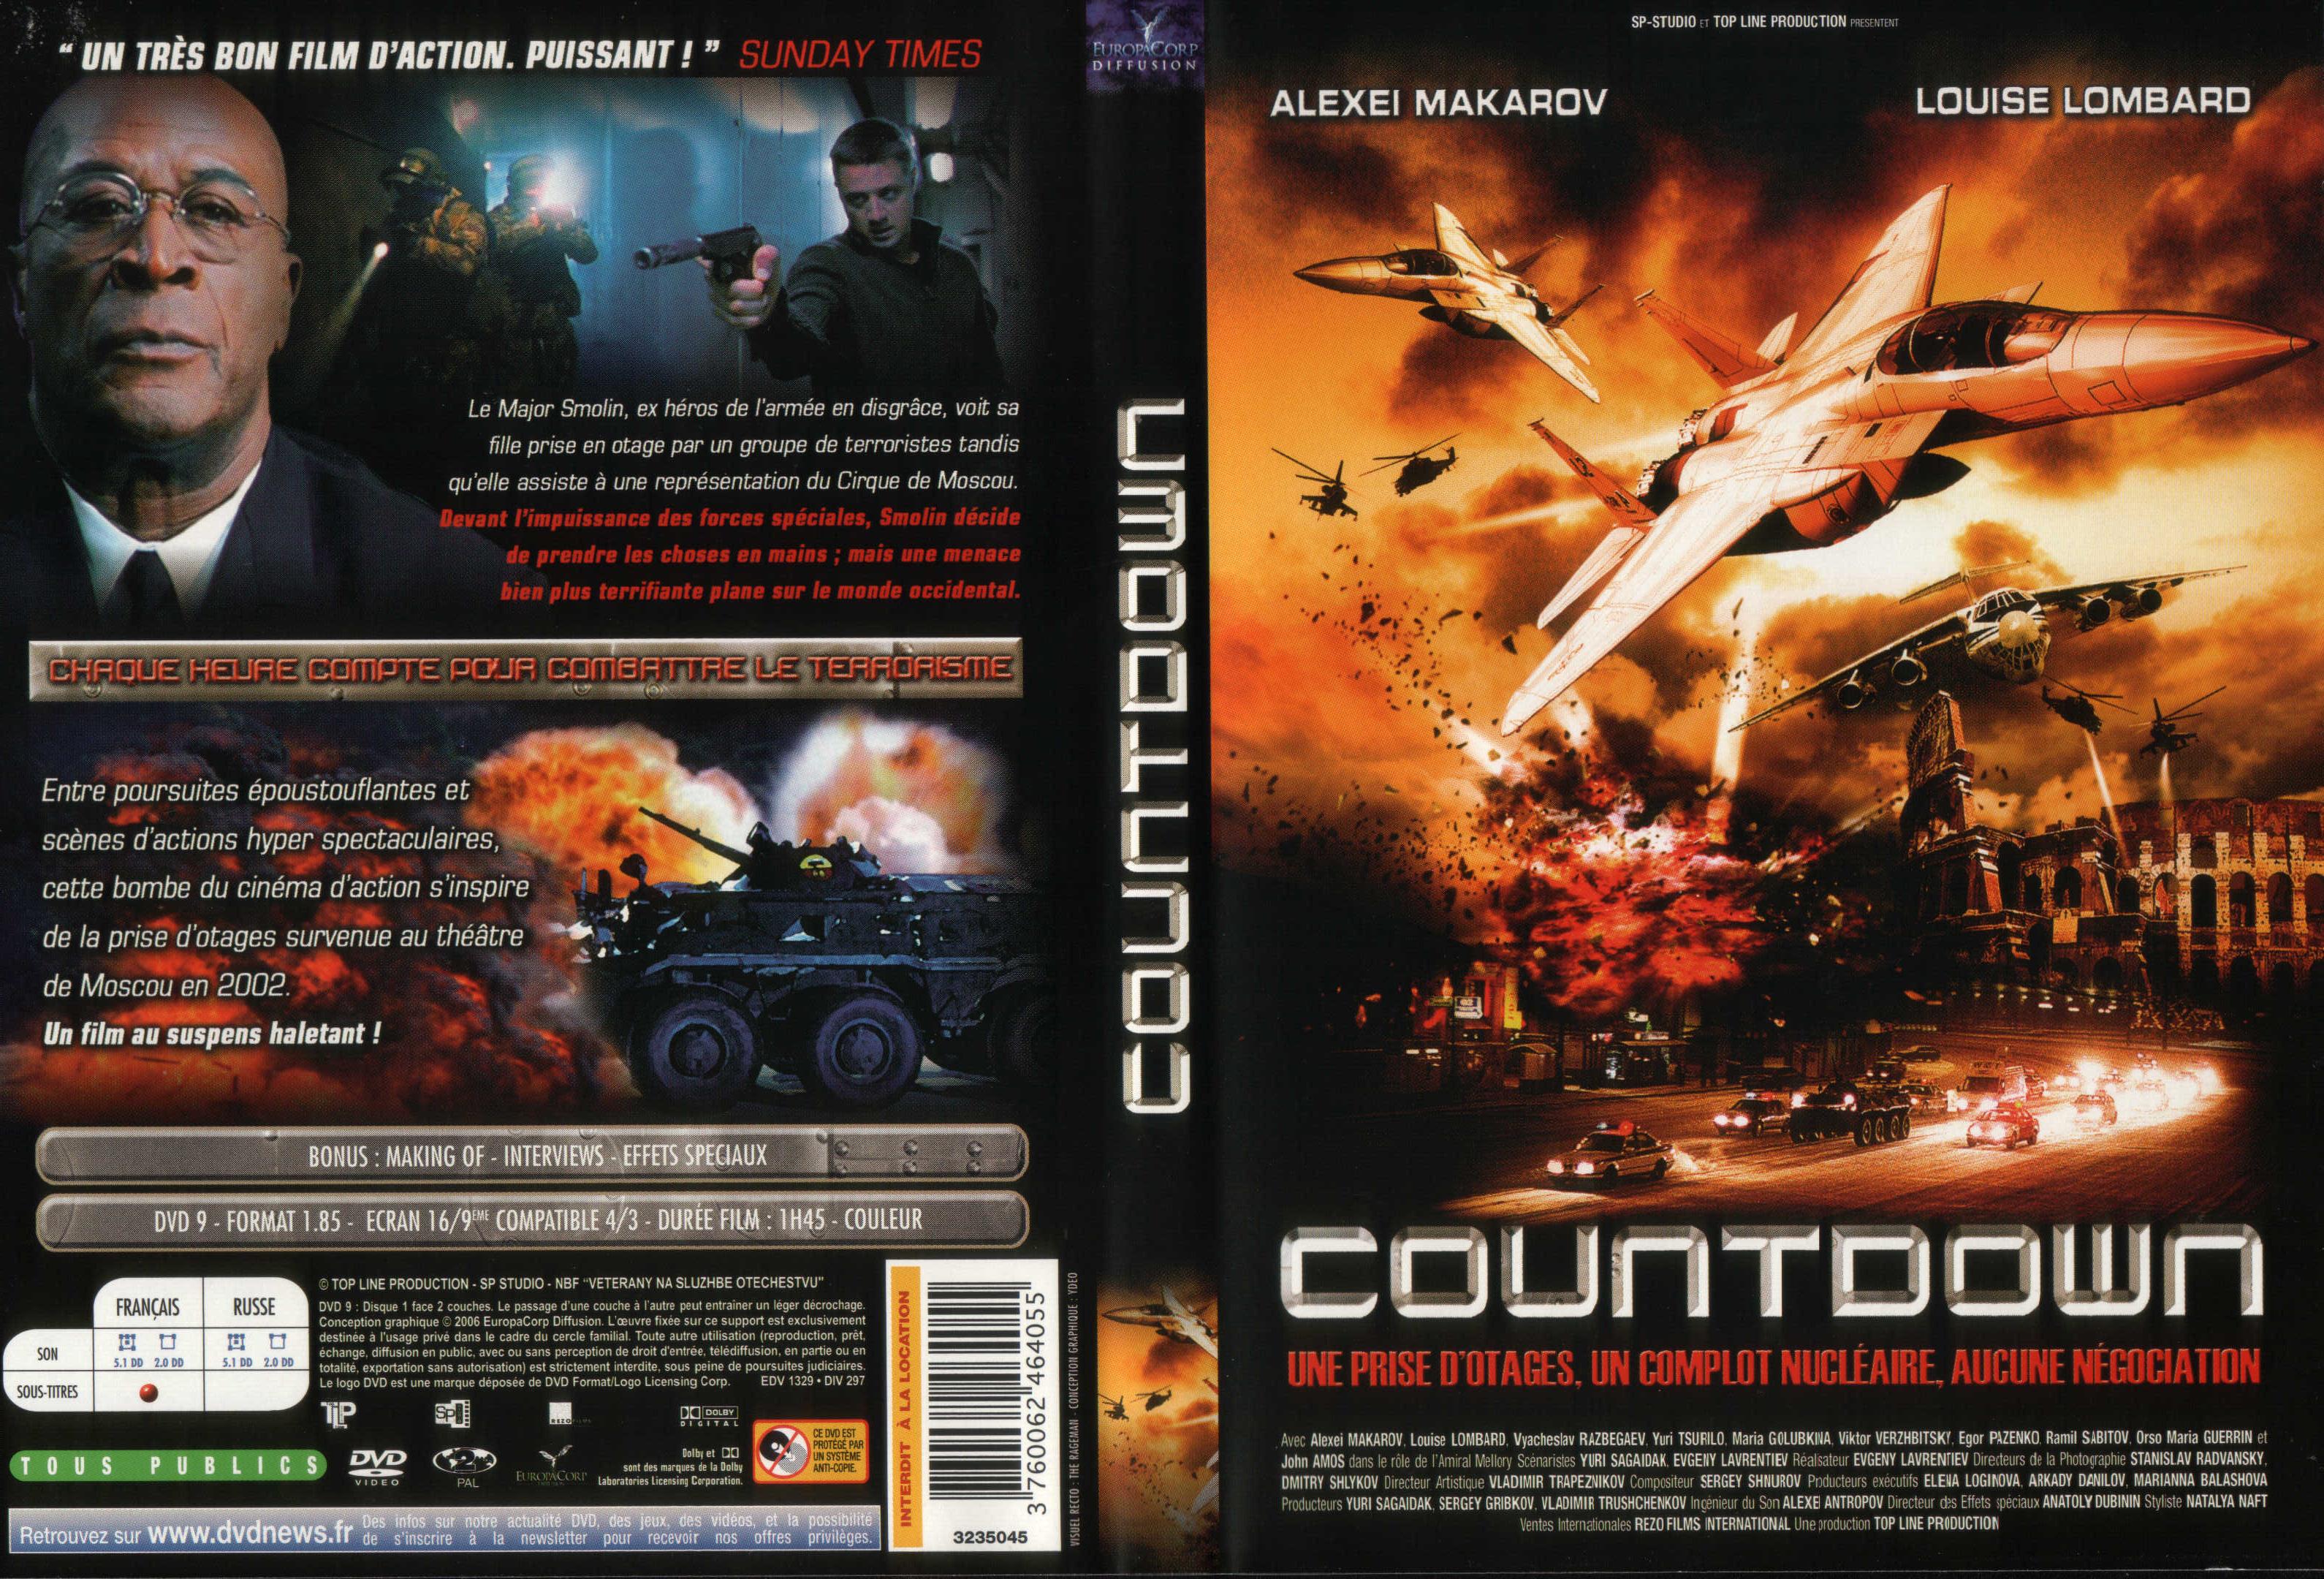 Jaquette DVD Countdown